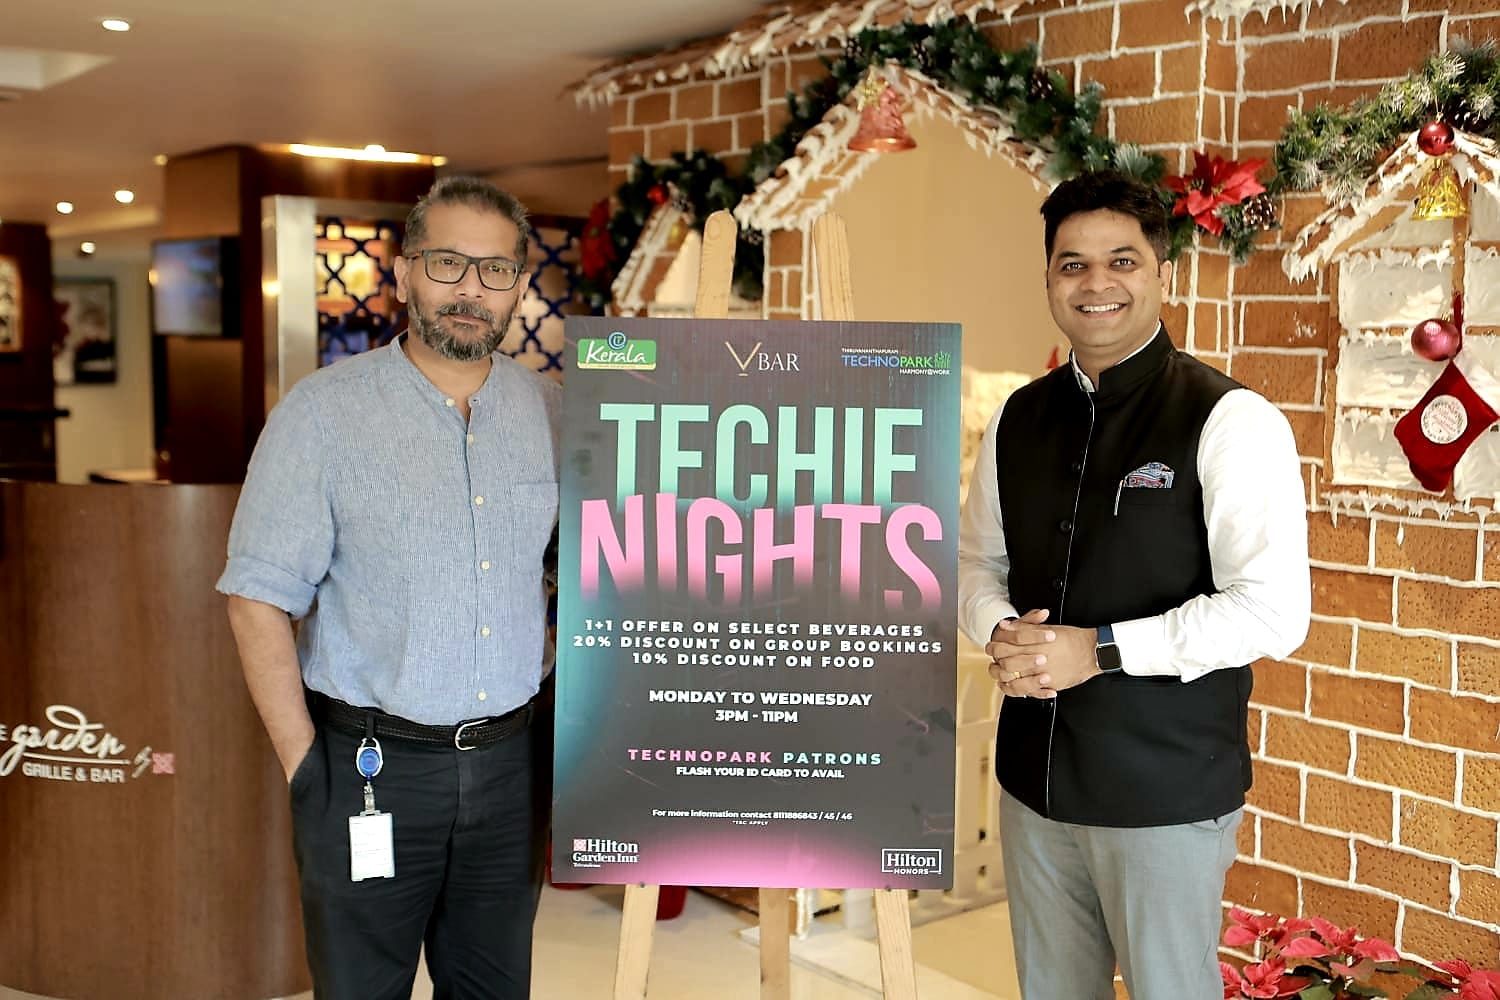 Techie Nights by Hilton for all Technopark employees